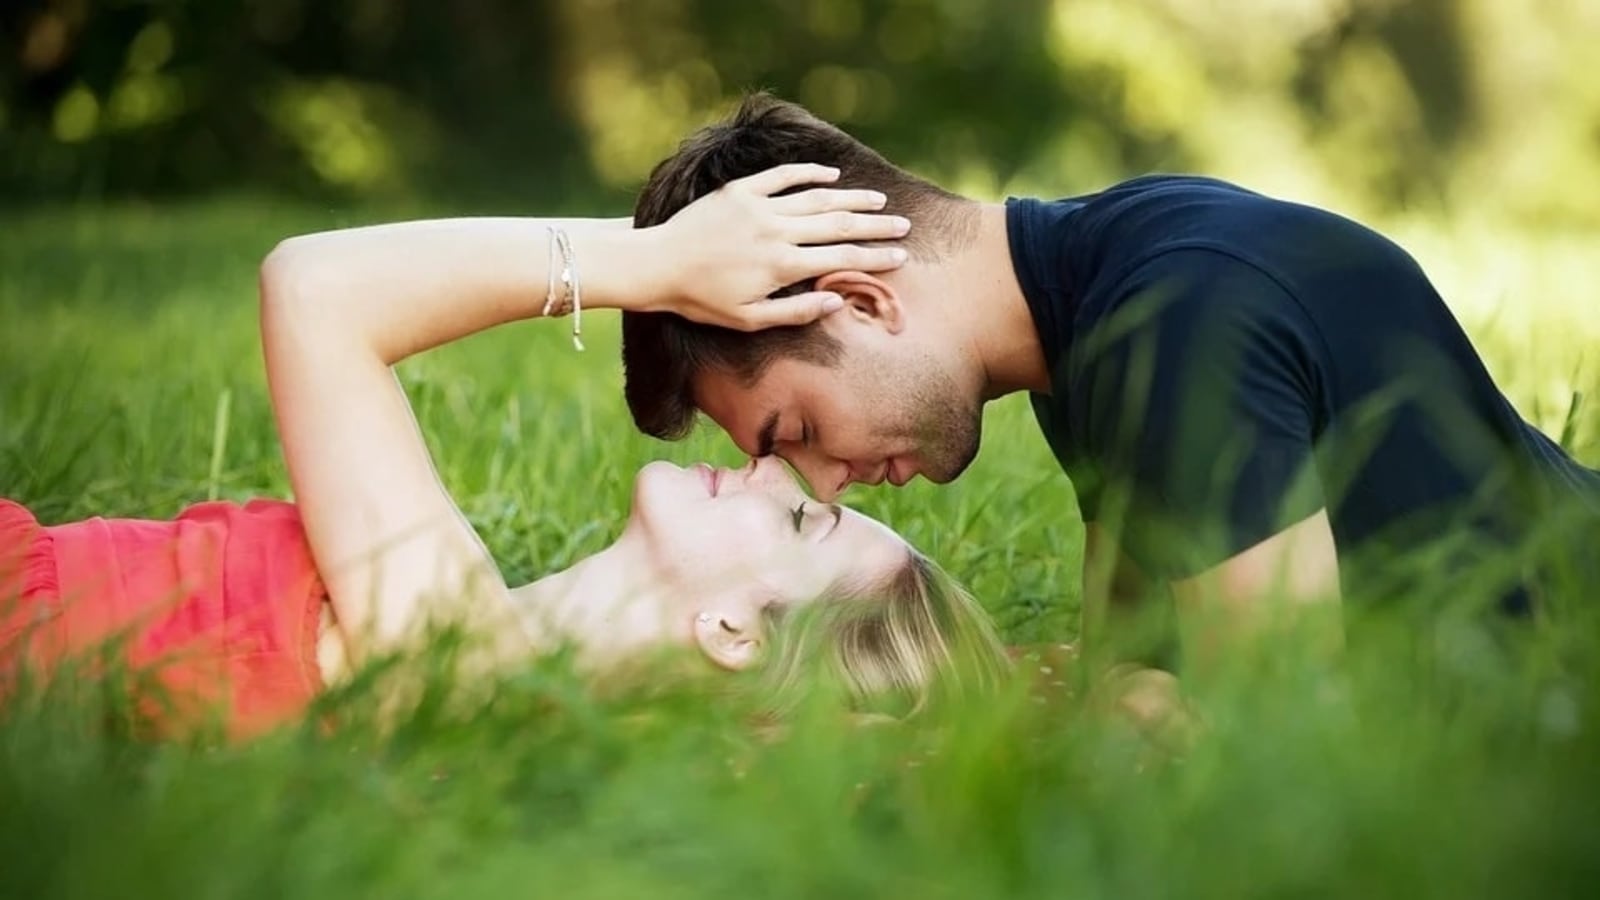 Experts say falling in love is great but watch your heart | Health